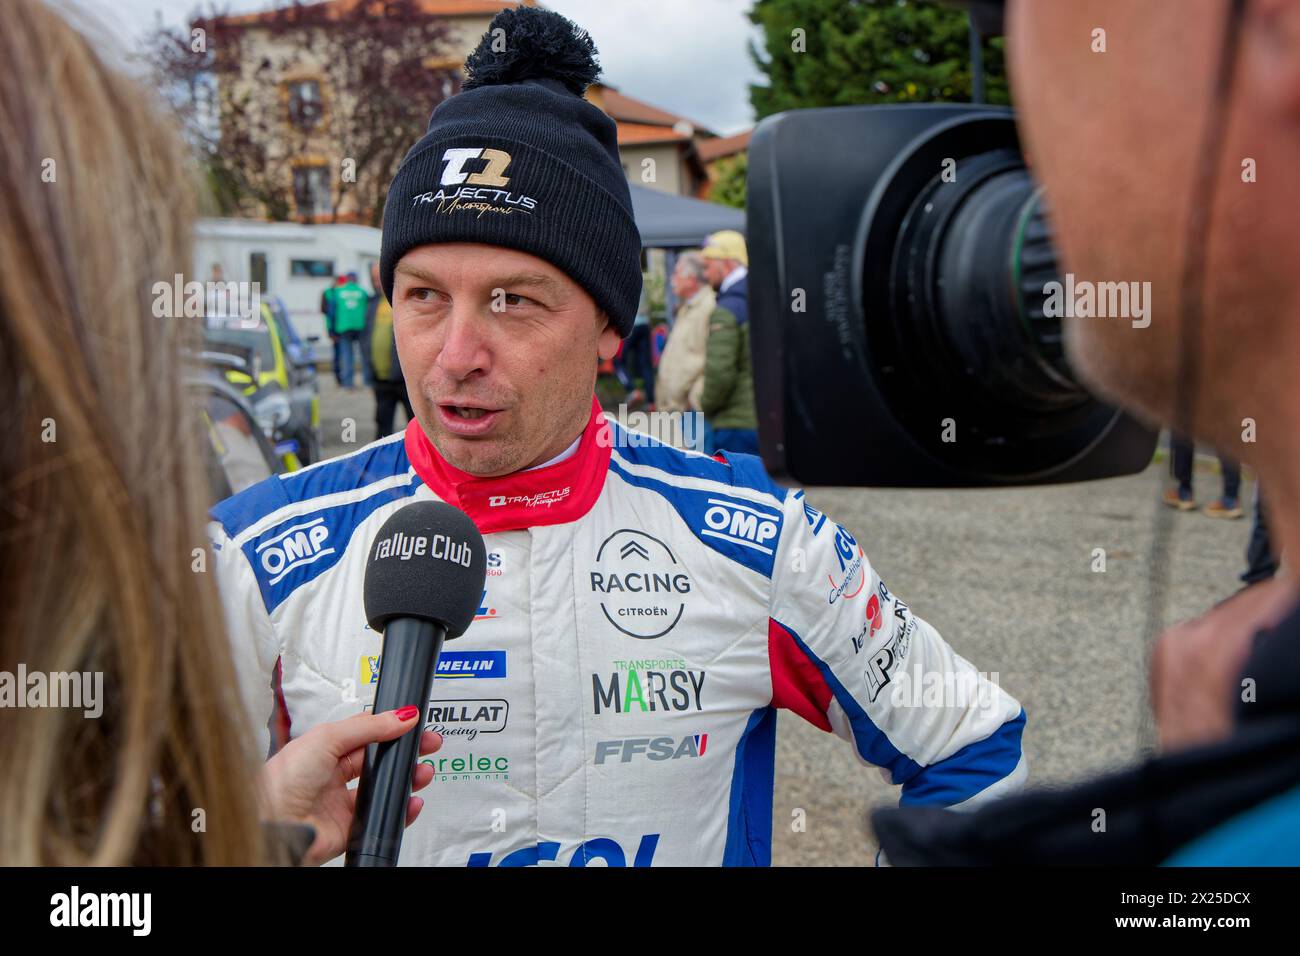 ST-ROMAIN, FRANCE, April 18, 2024 : Interview of drivers at the checkpoint of the Charbonnieres rally. The Charbonnières rally is one of the oldest ca Stock Photo